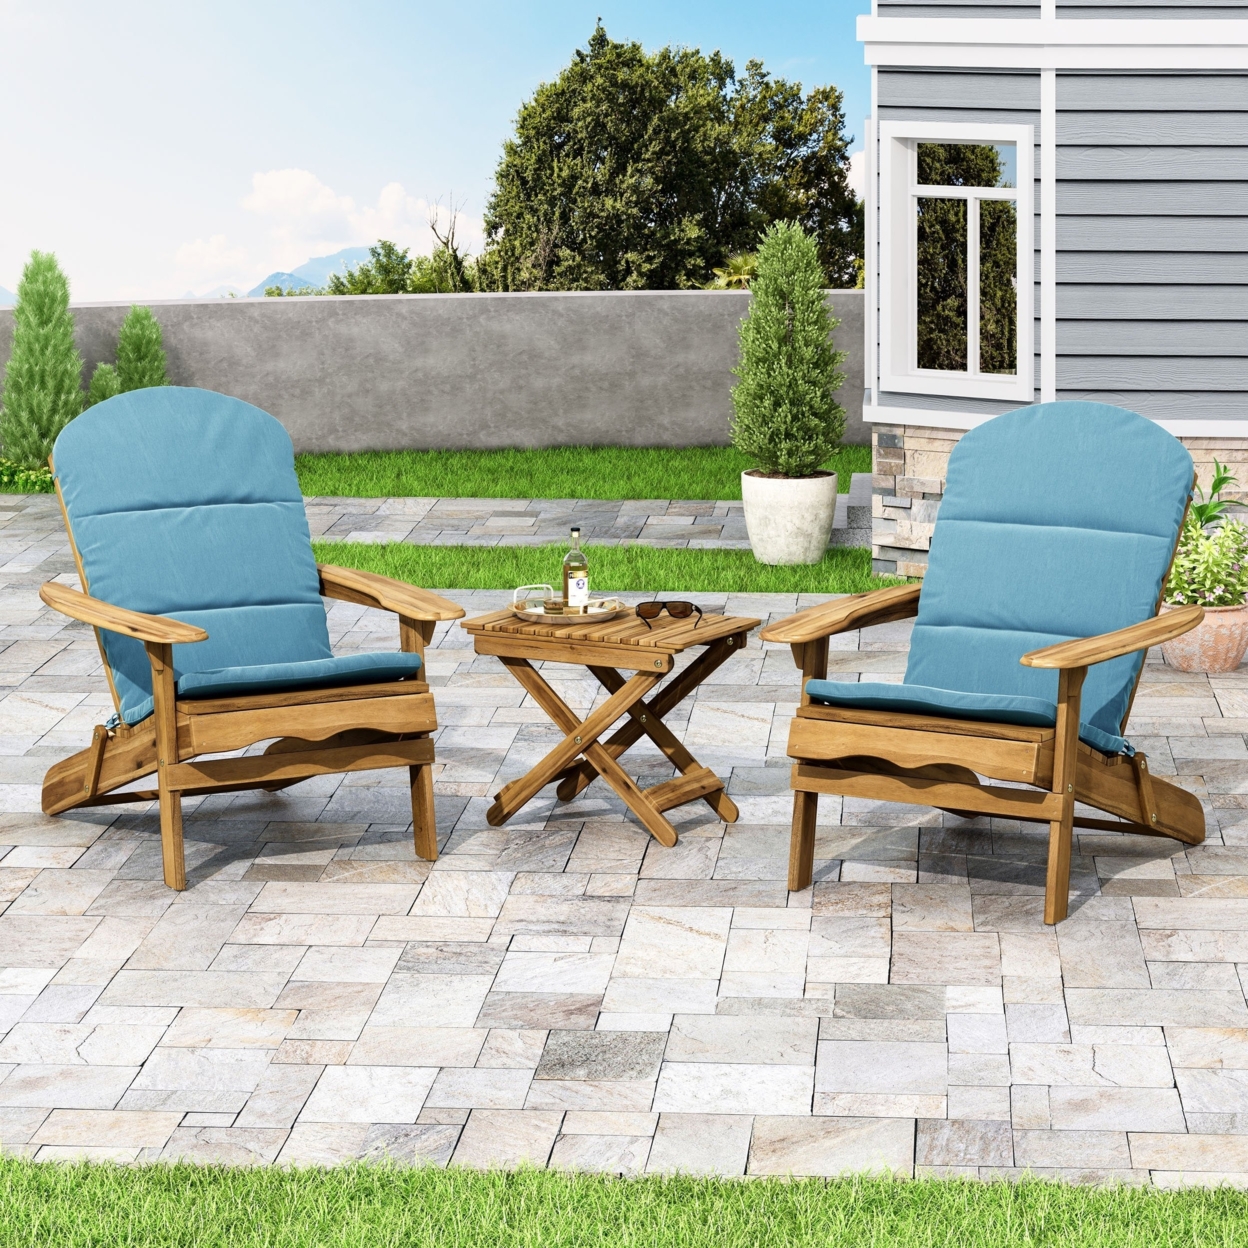 Reed Outdoor 2 Seater Acacia Wood Chat Set With Water Resistant Cushions - White/gray